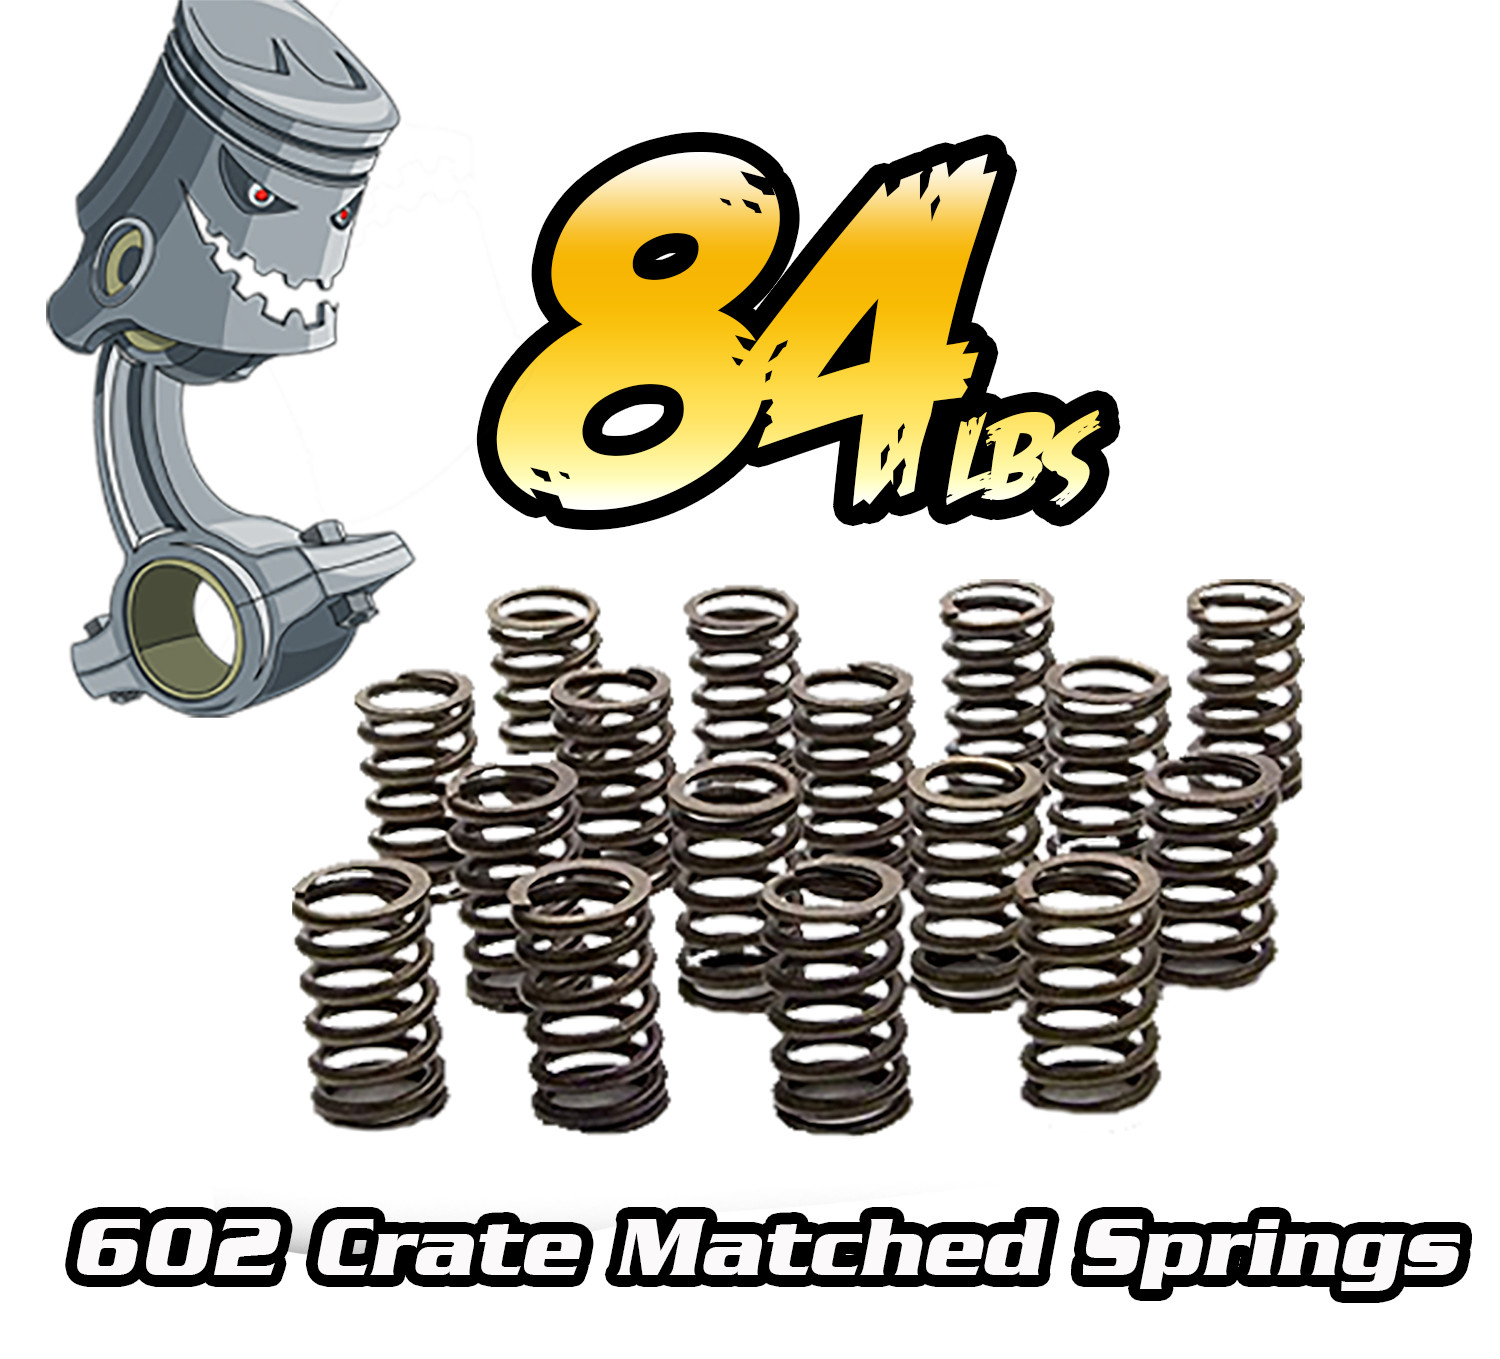 PRE-ORDER - Super Rare 84lb Matched Valve Springs for 602 Crate